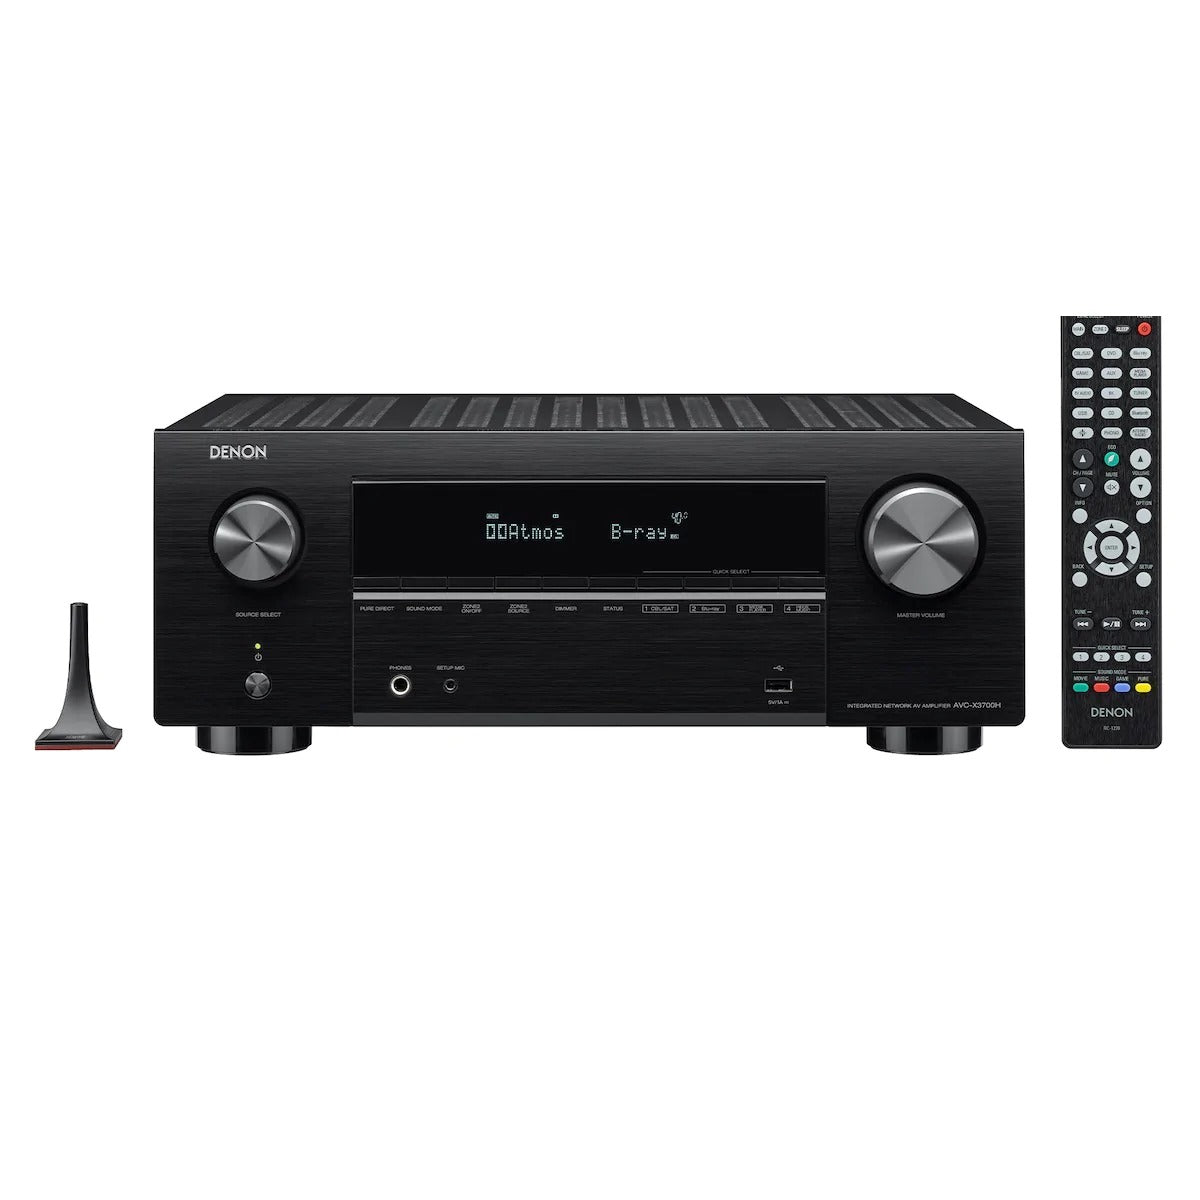 Denon AVC-X3700H 9.2ch 8K AV Receiver With 3D Audio, Voice Control And HEOS Built-In®